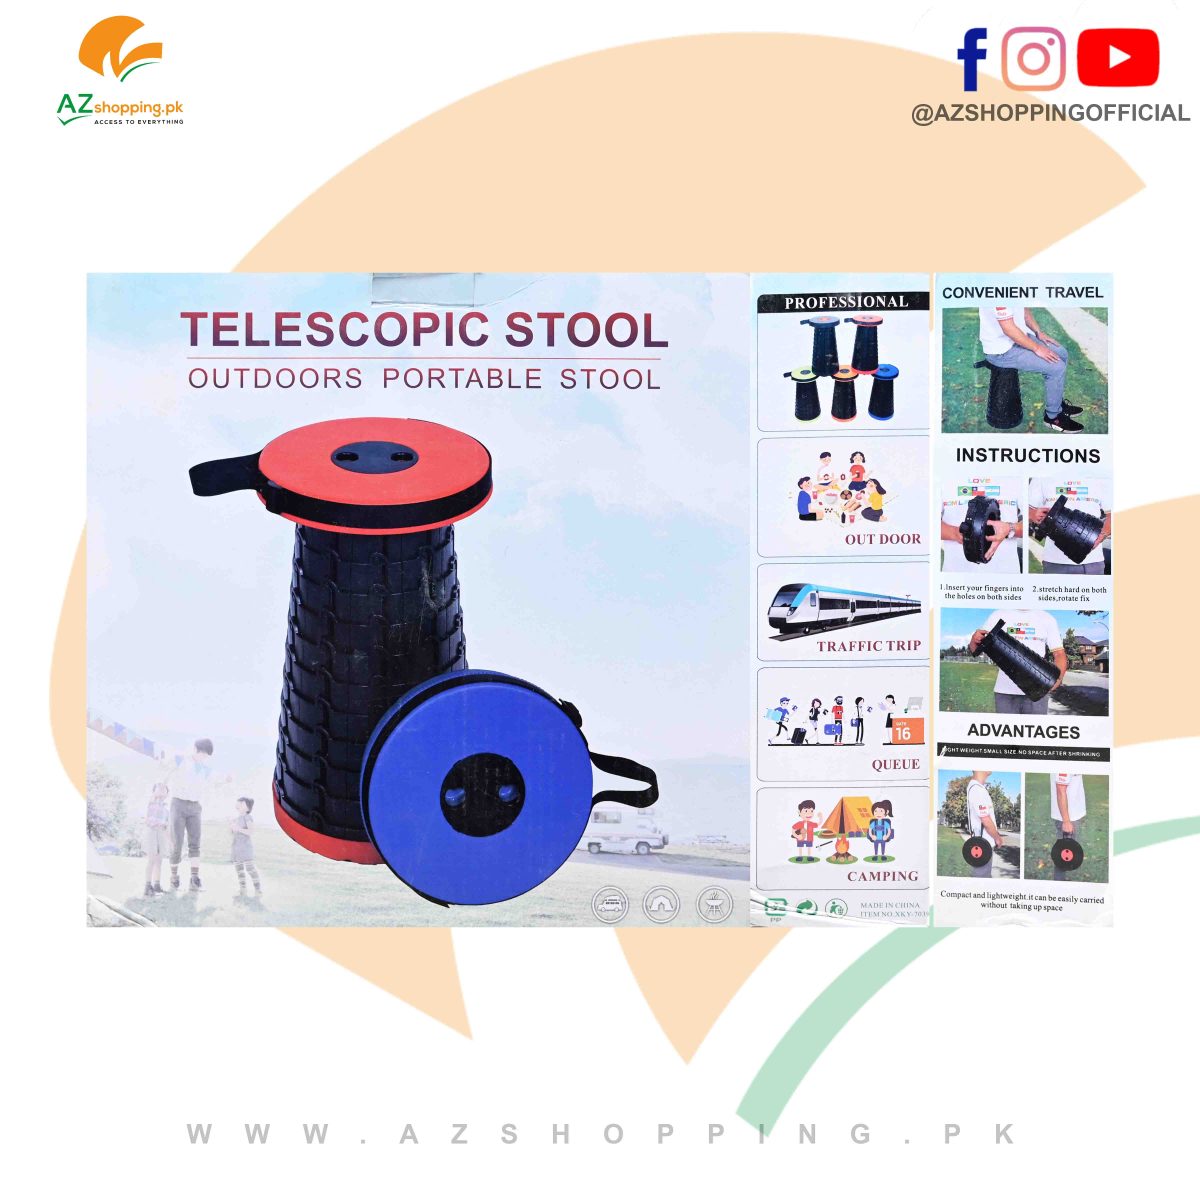 Telescopic Stool - Portable Collapsible Folding Stool Retractable Lightweight Camping Chair with Backpack Pad - Heavy Duty 200kg Weight Capacity